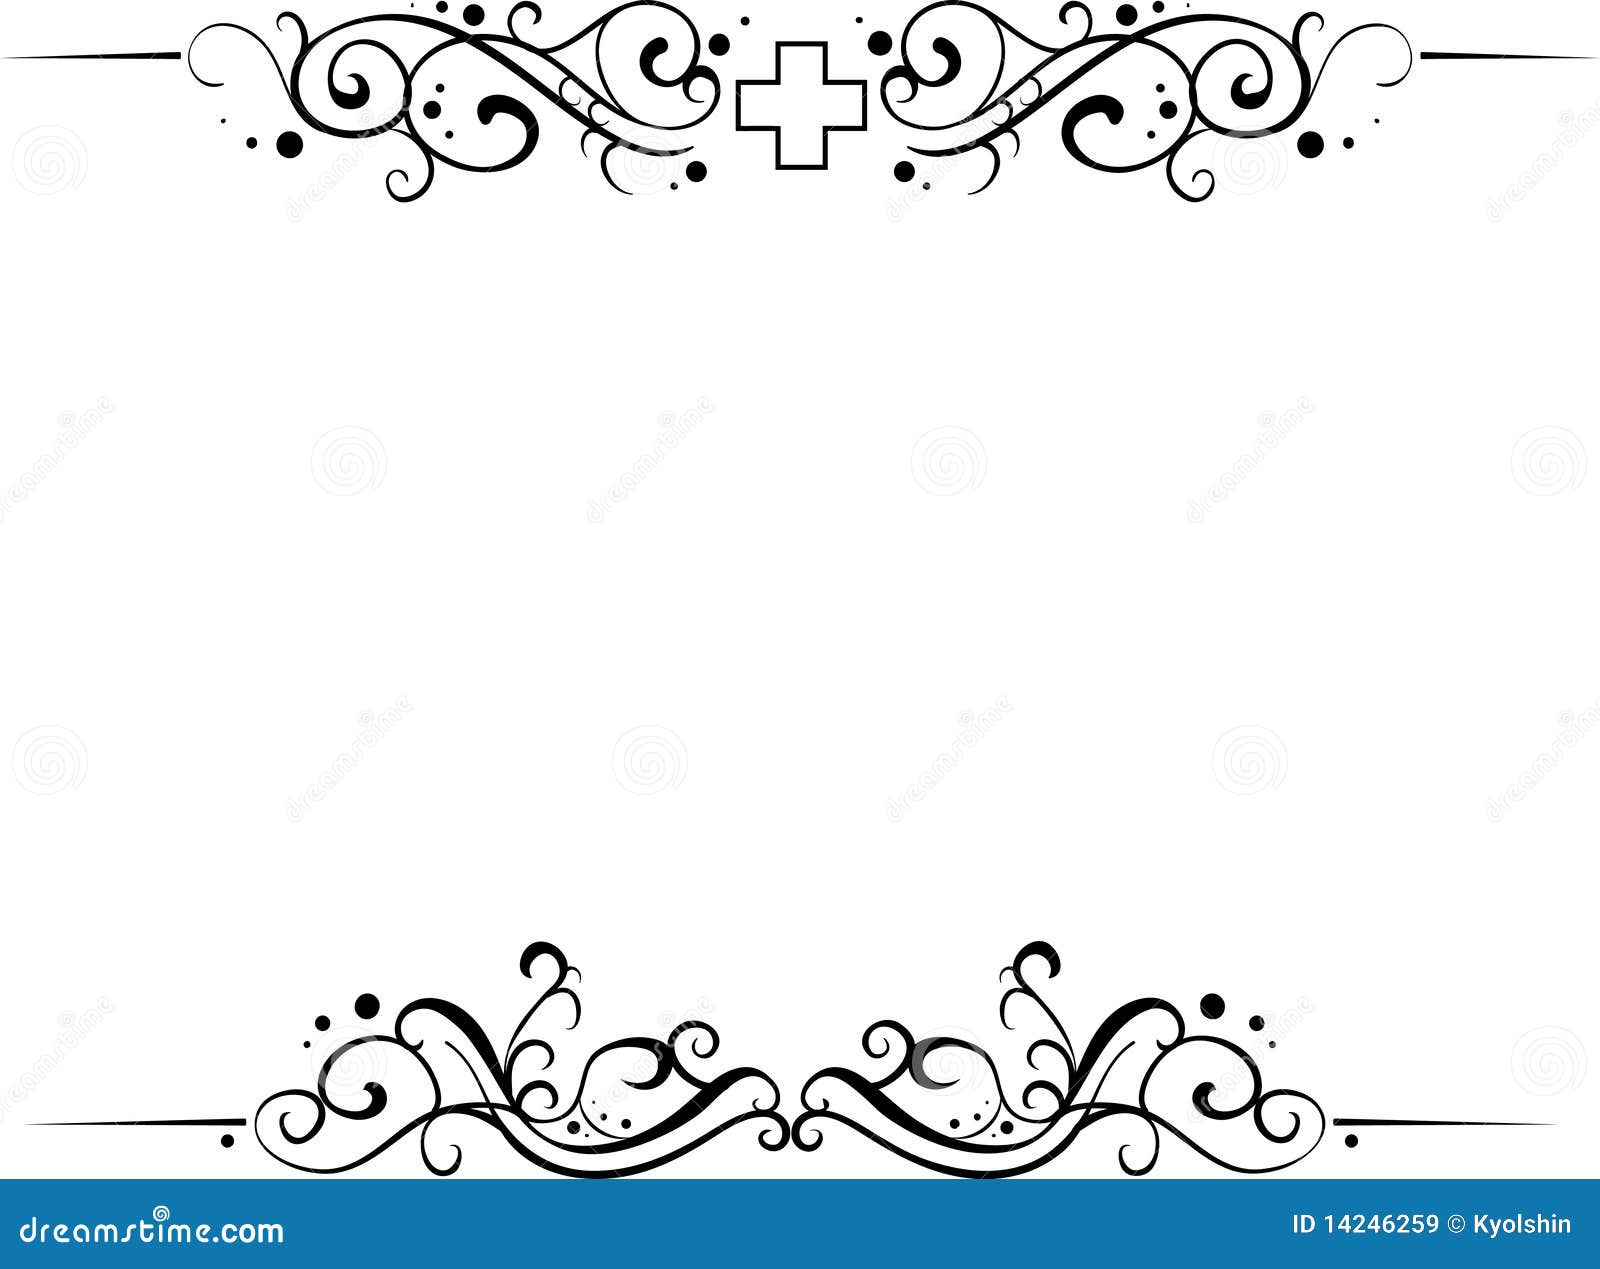 free medical clipart borders - photo #46